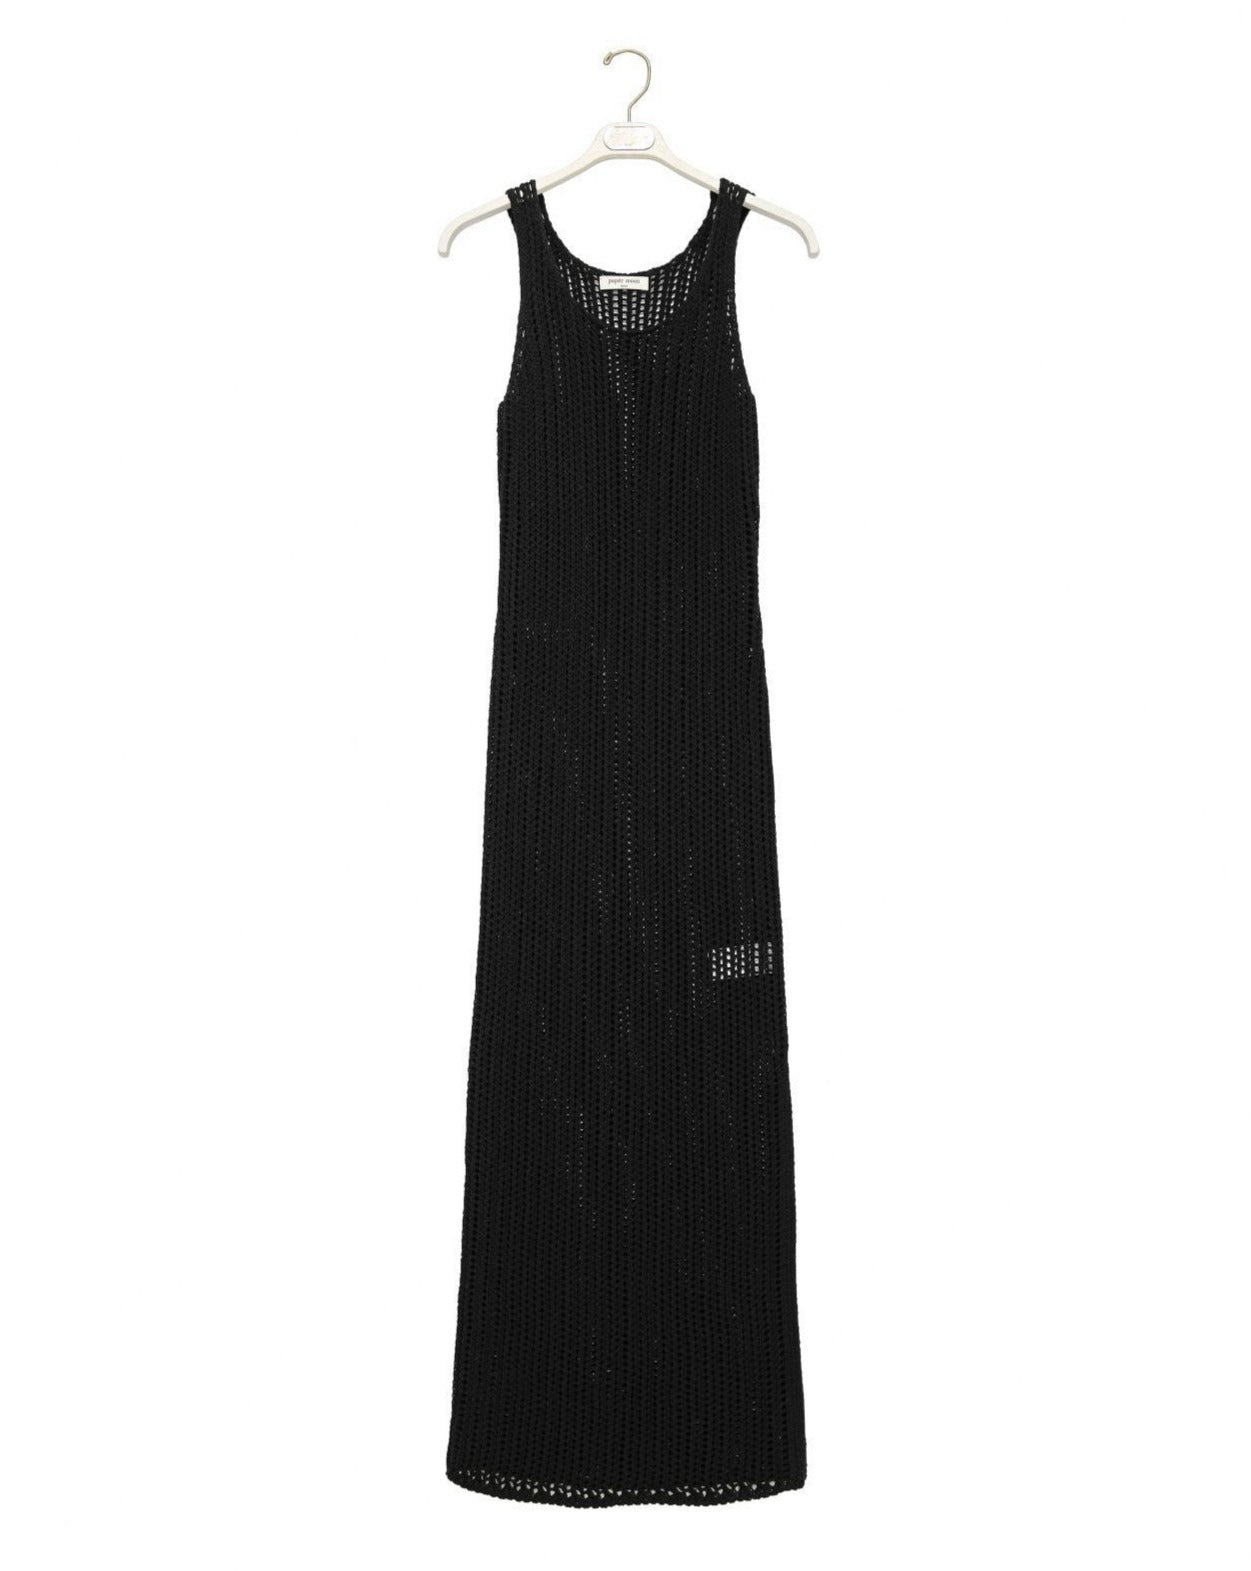 【PAPERMOON 페이퍼 문】SS / Organic Cotton One Slit Maxi Cover Up Knit Dress